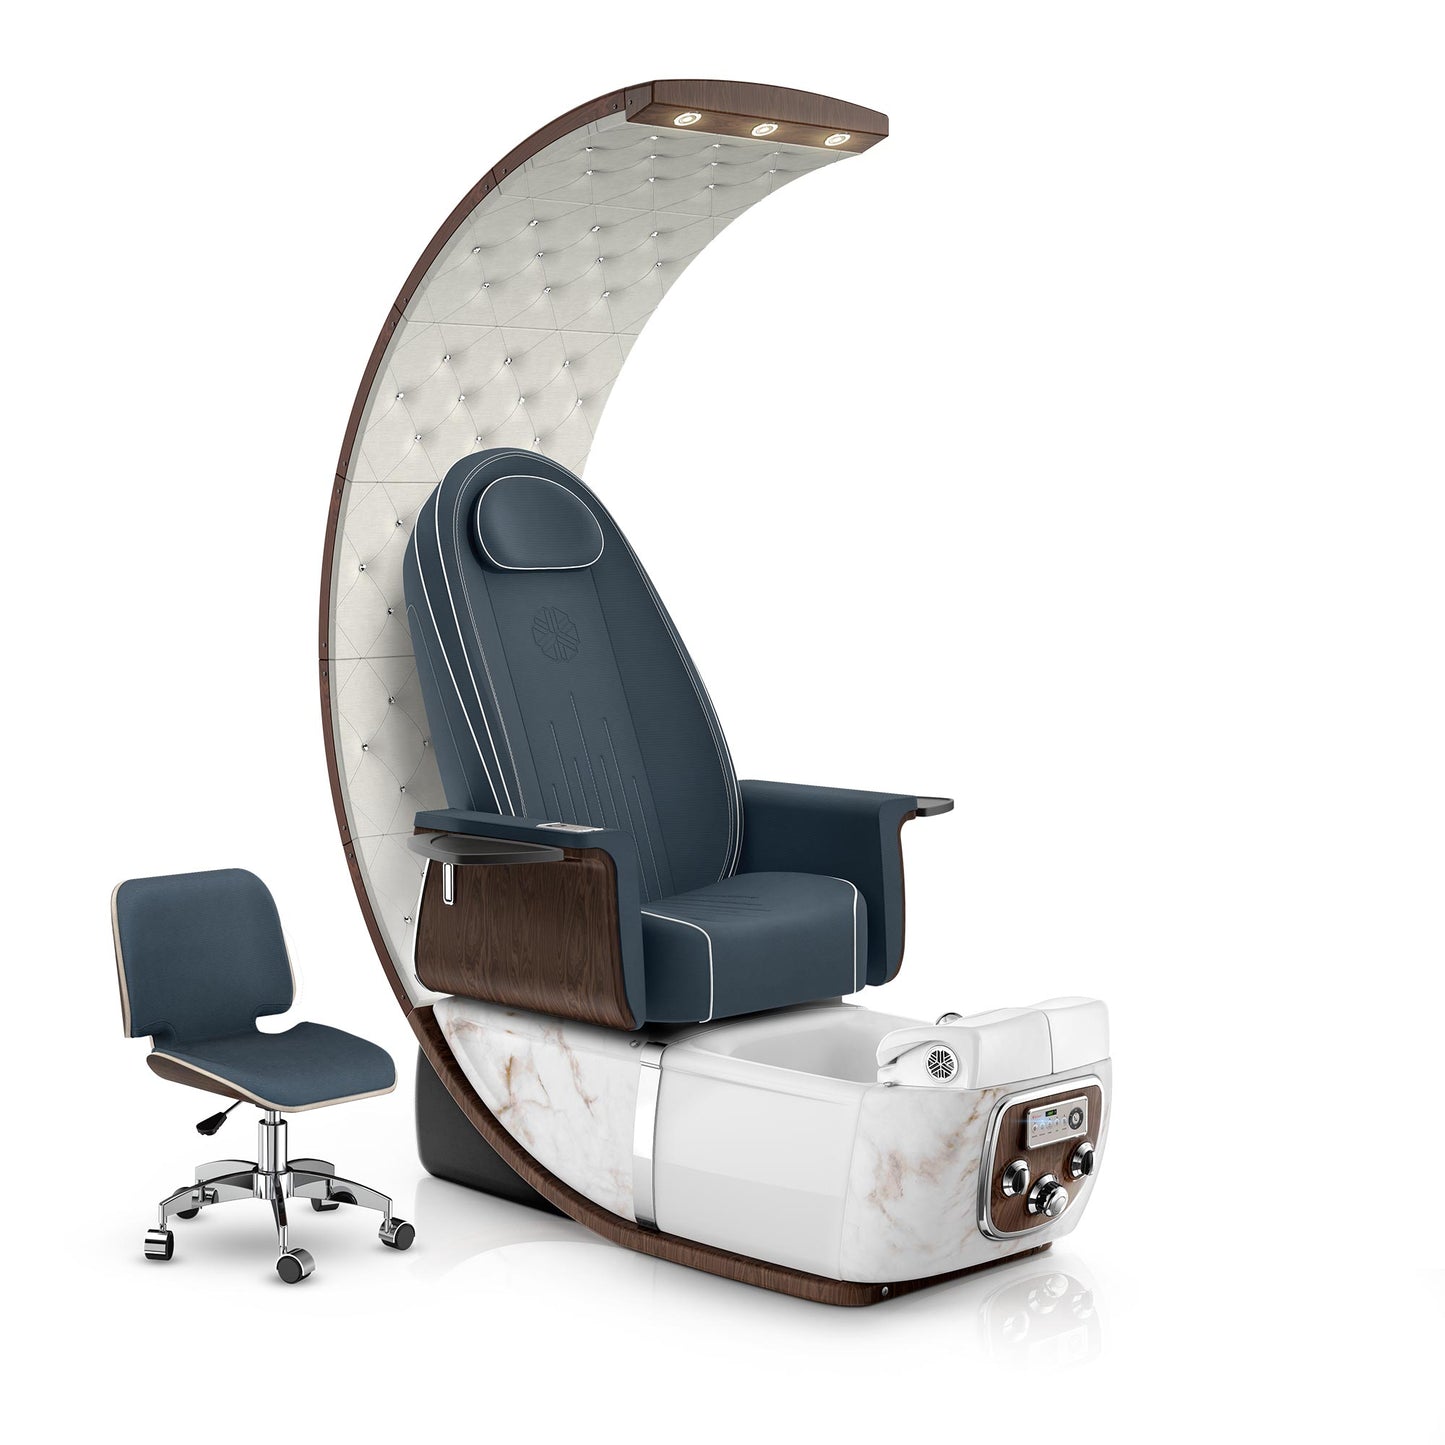 Lexor PRIVÉ Lounge pedicure chair with midnight cushion and white moonstone spa base